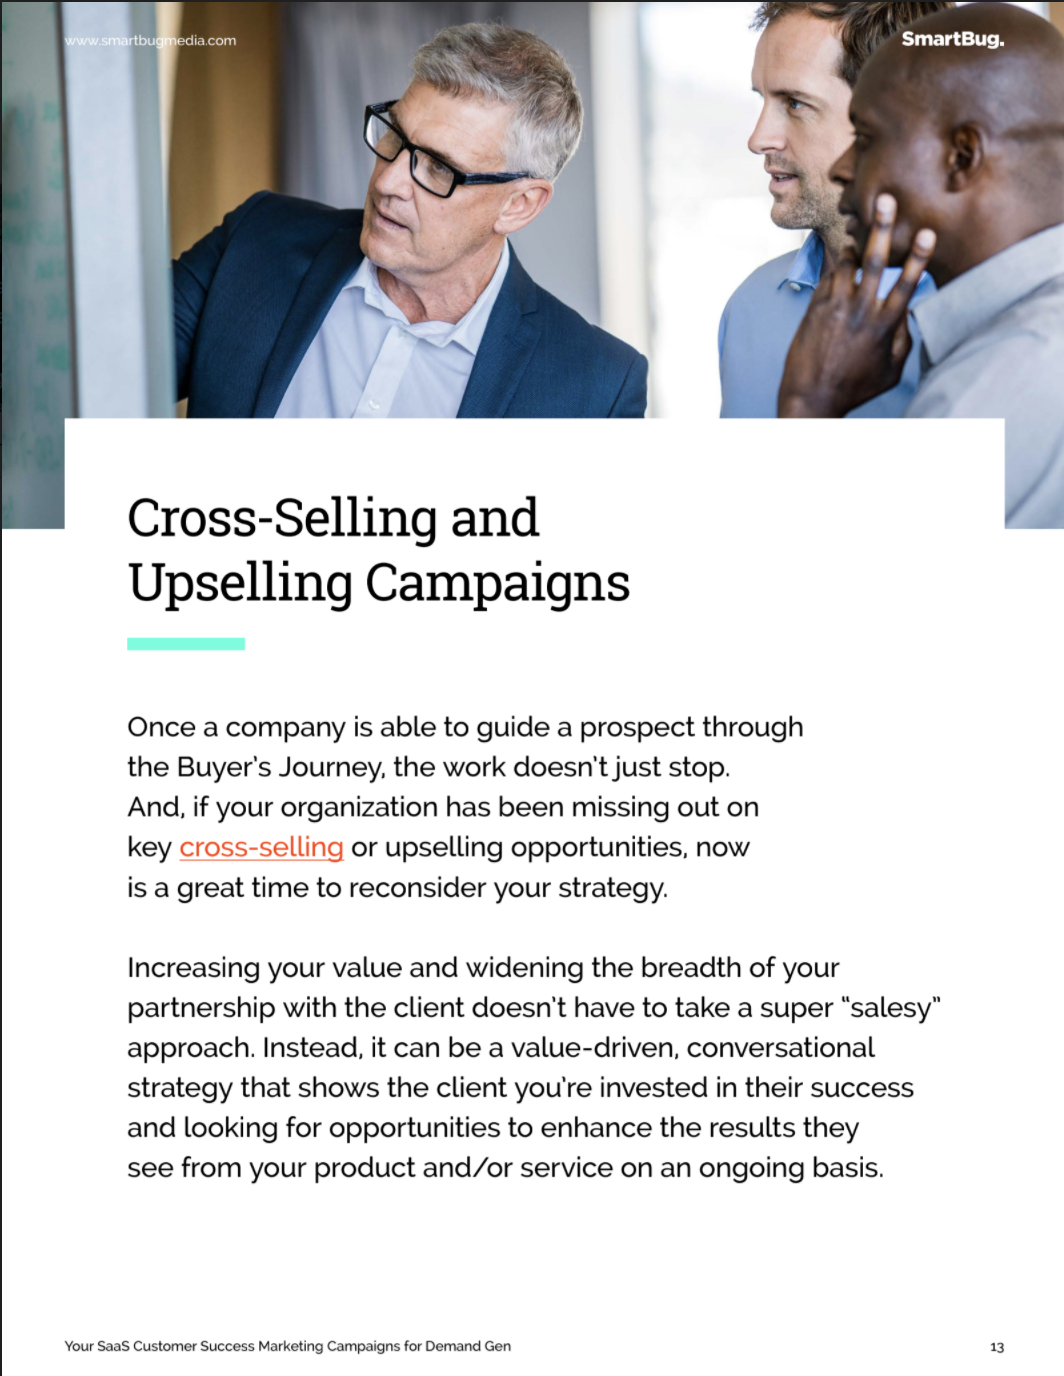 Cross-Selling and Upselling Campaigns